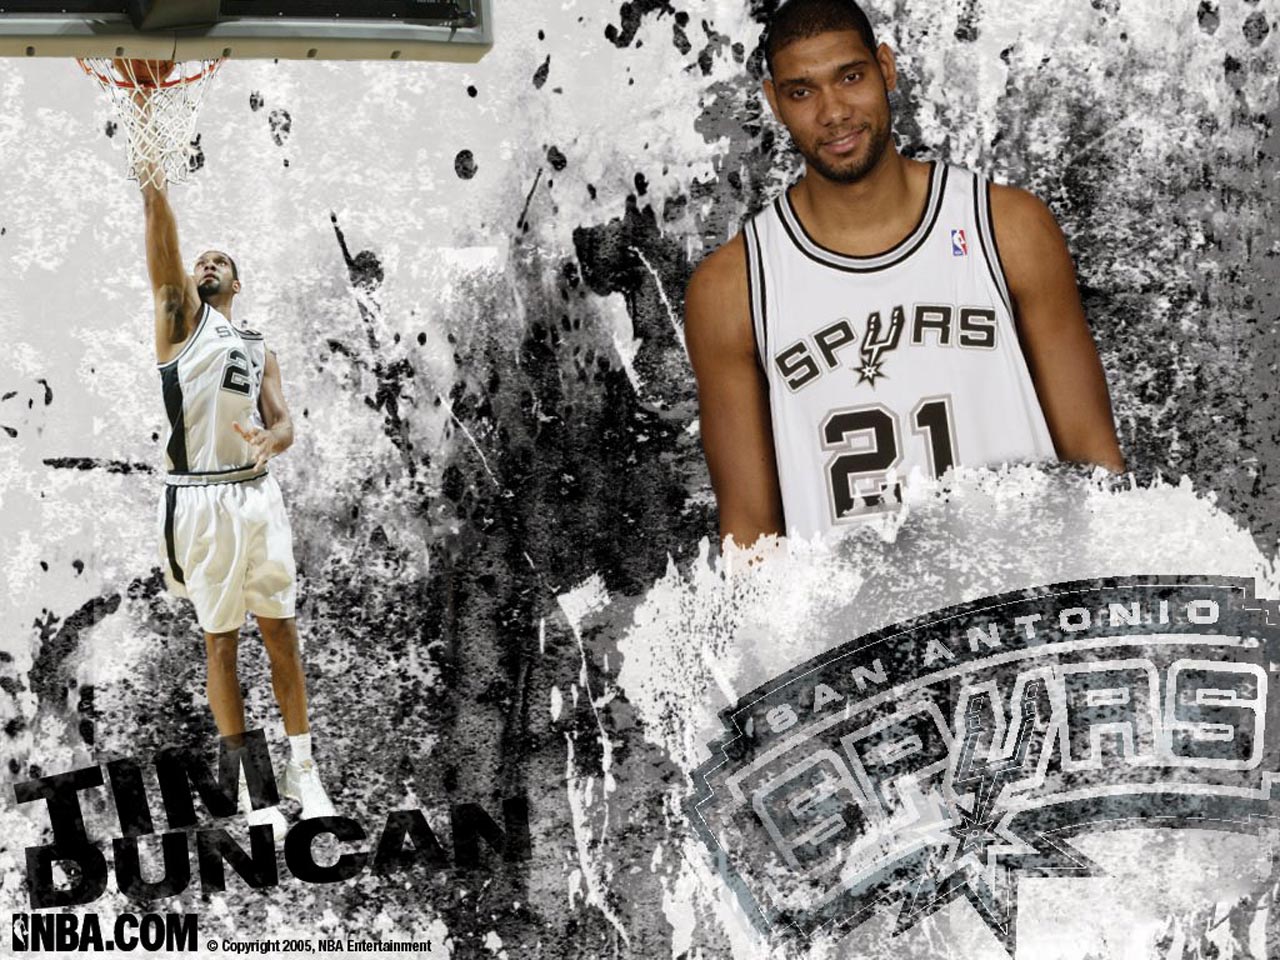  only posted 1 wallpaper of him so far (two if i count wallpaper in Spurs 